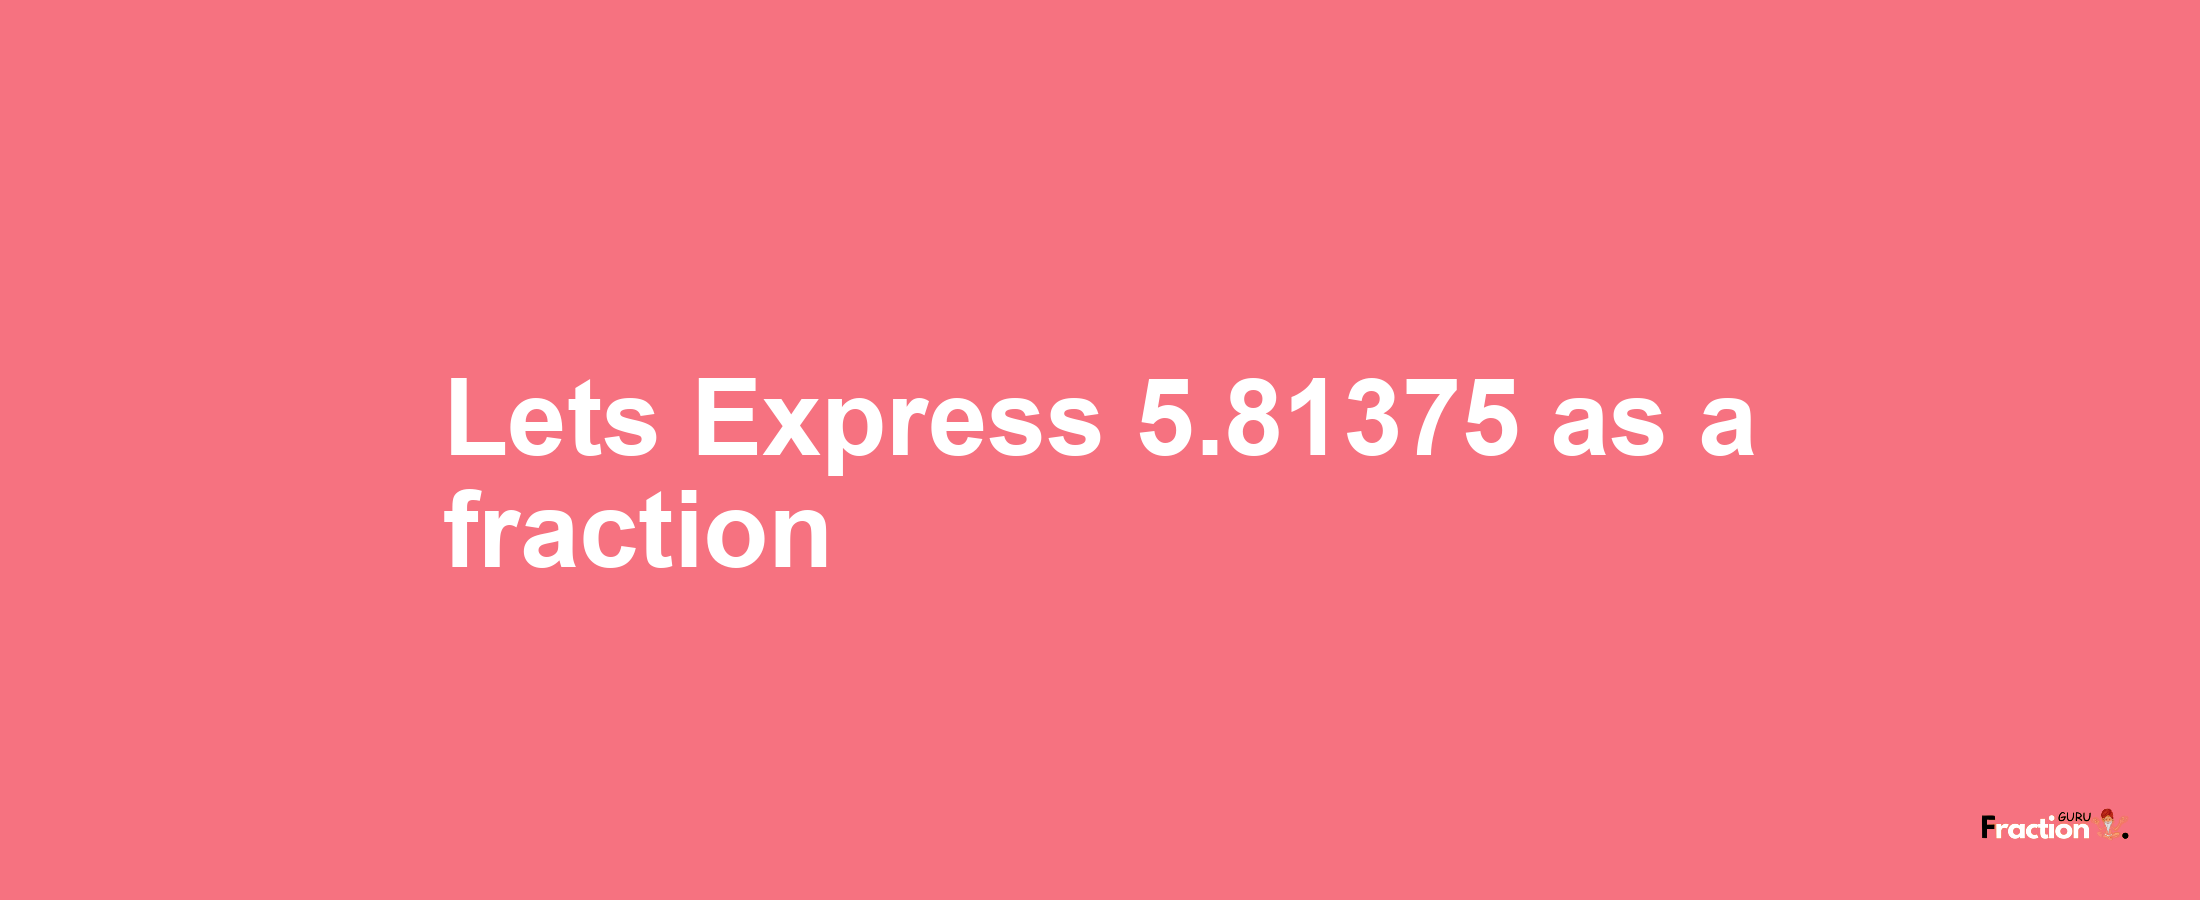 Lets Express 5.81375 as afraction